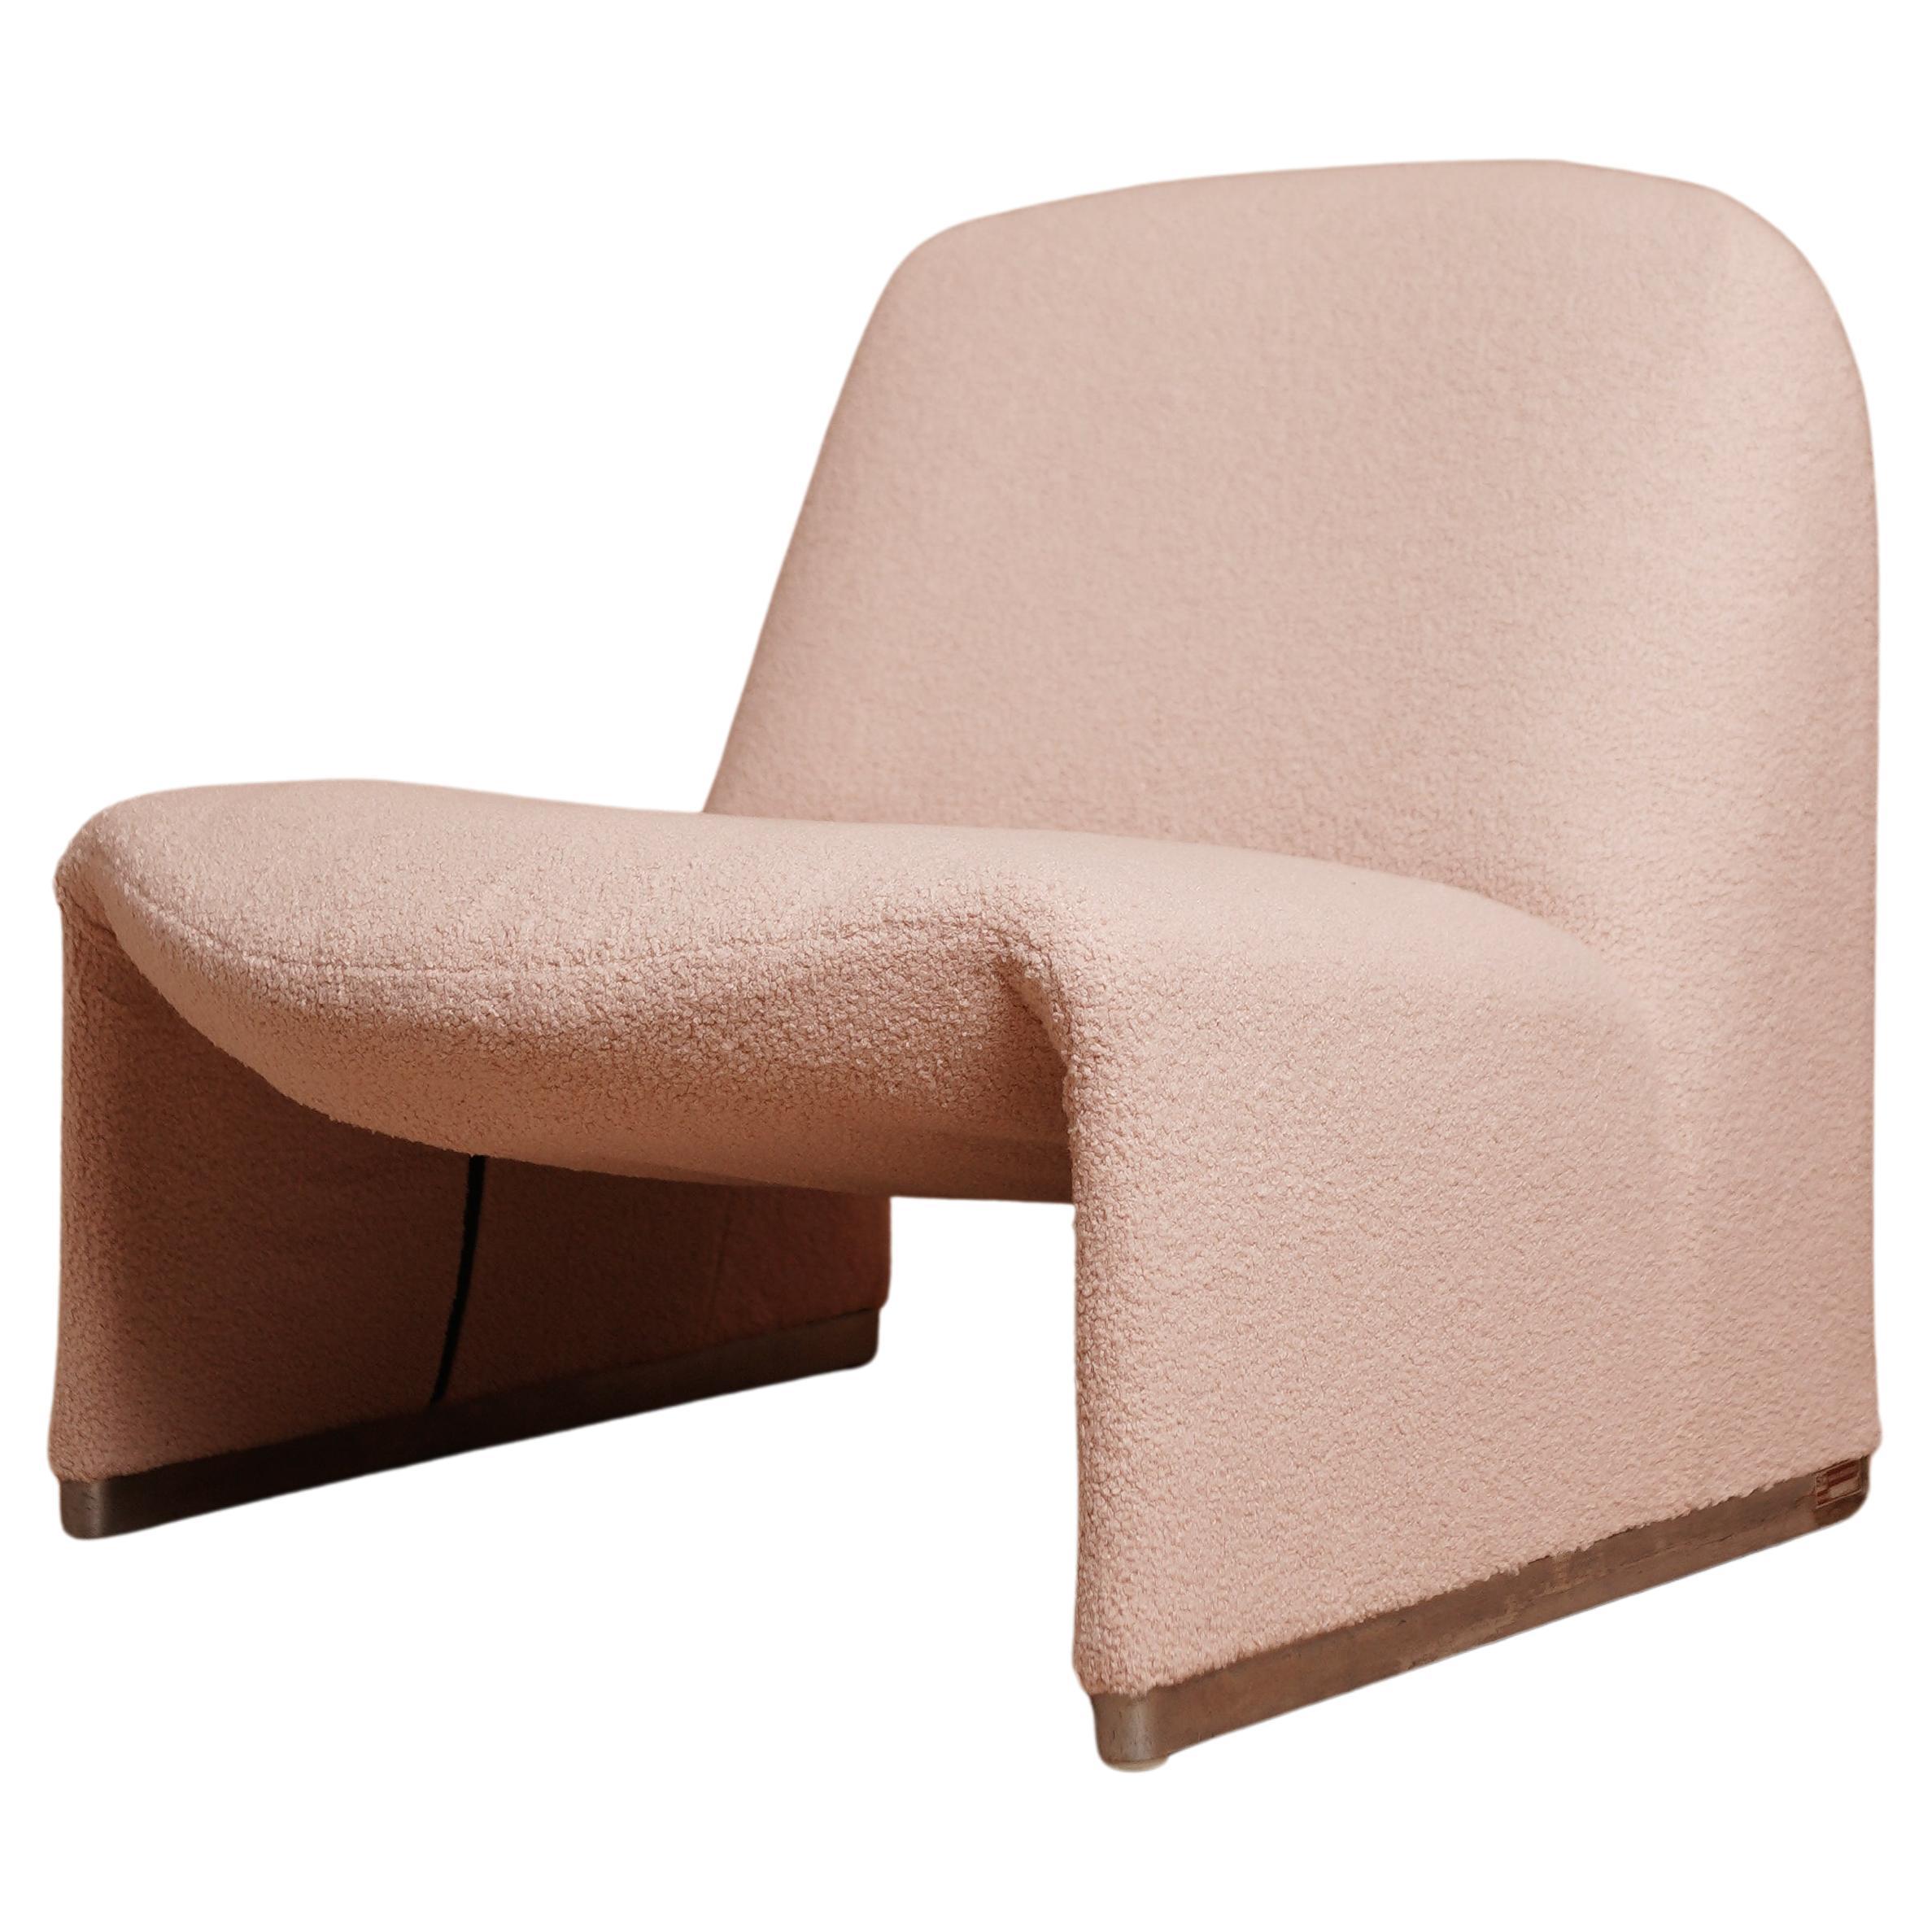 Alky Chair By Giancarlo Piretti for Castelli 1970s